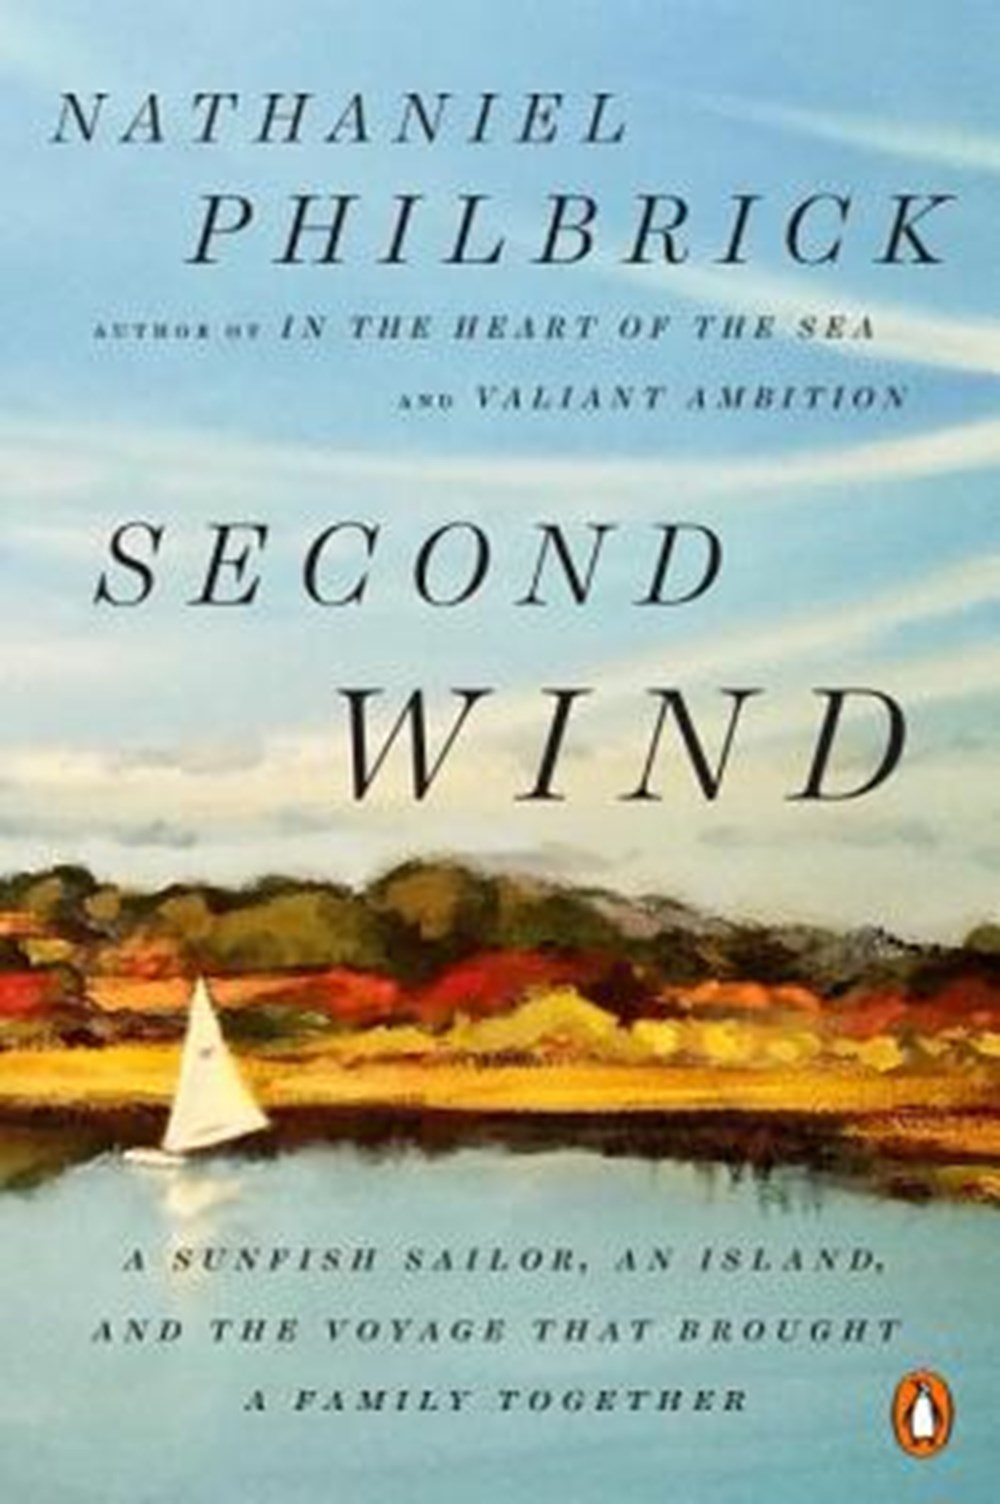 Second Wind A Sunfish Sailor, an Island, and the Voyage That Brought a Family Together